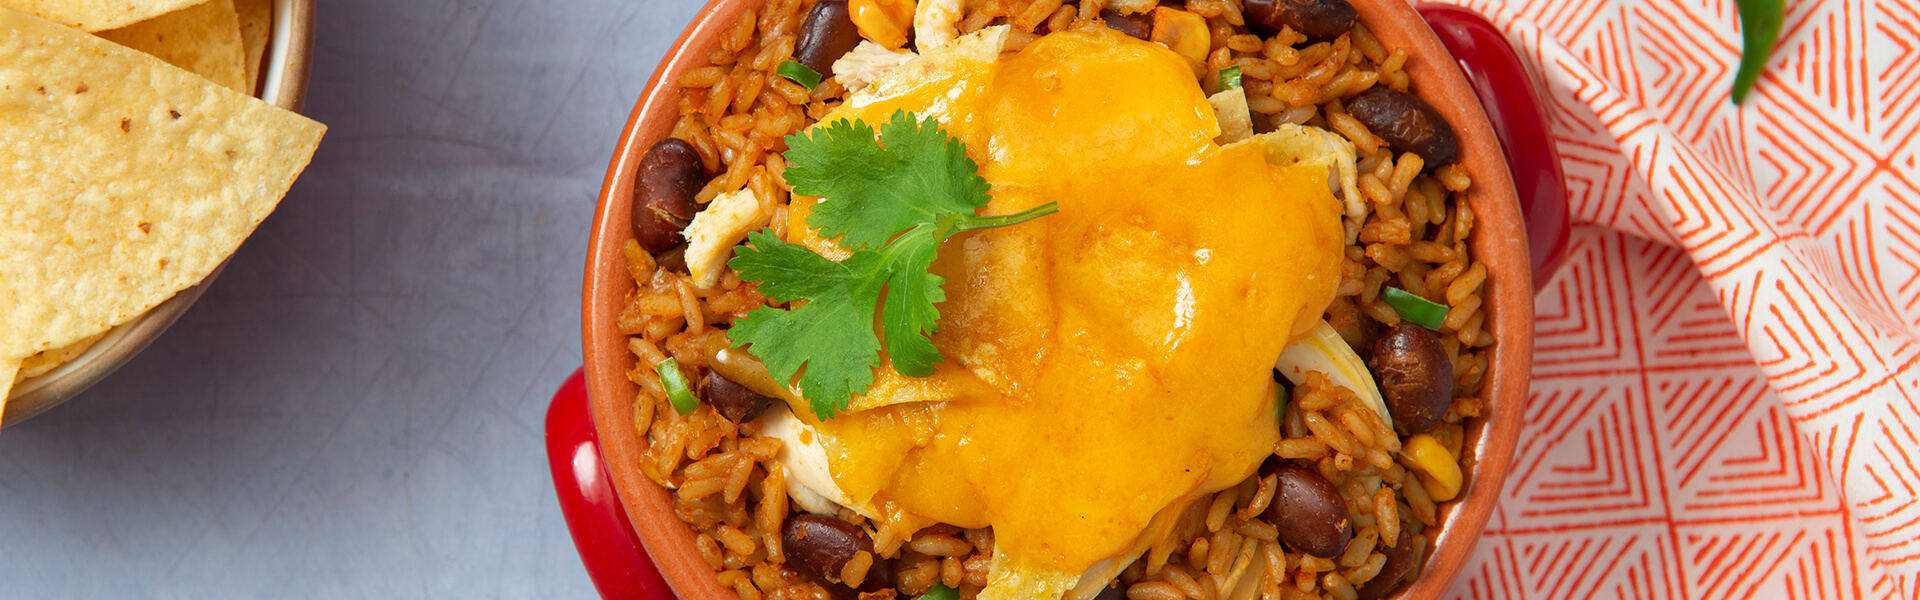 Tex-Mex Mini Casserole with Rice and Beans | Minute® Rice